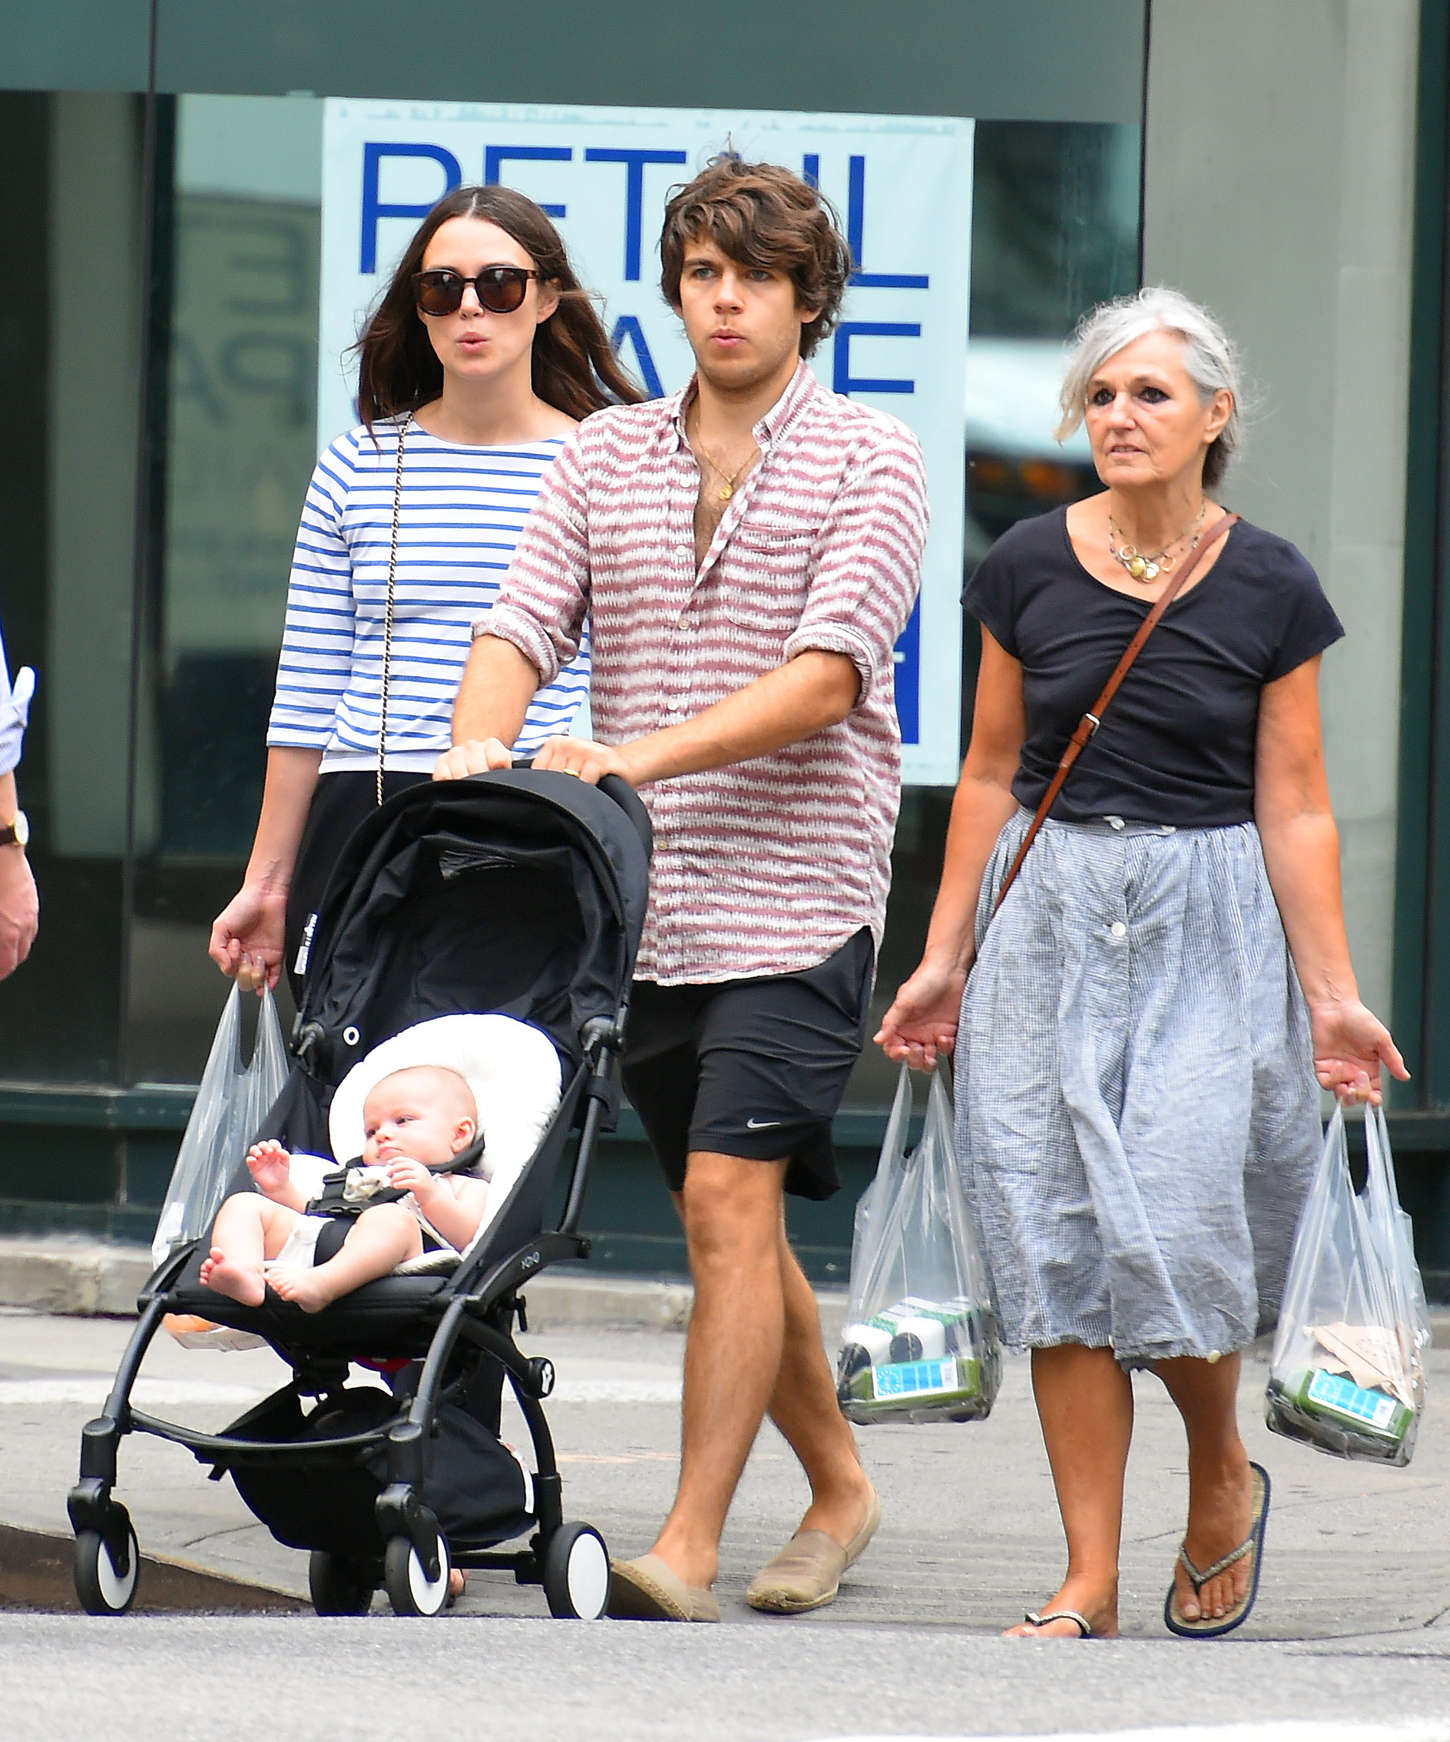 Family photo of the actress &  model, married to James Righton,  famous for Bend It Like Beckham & Pirates of the Caribbean.
  